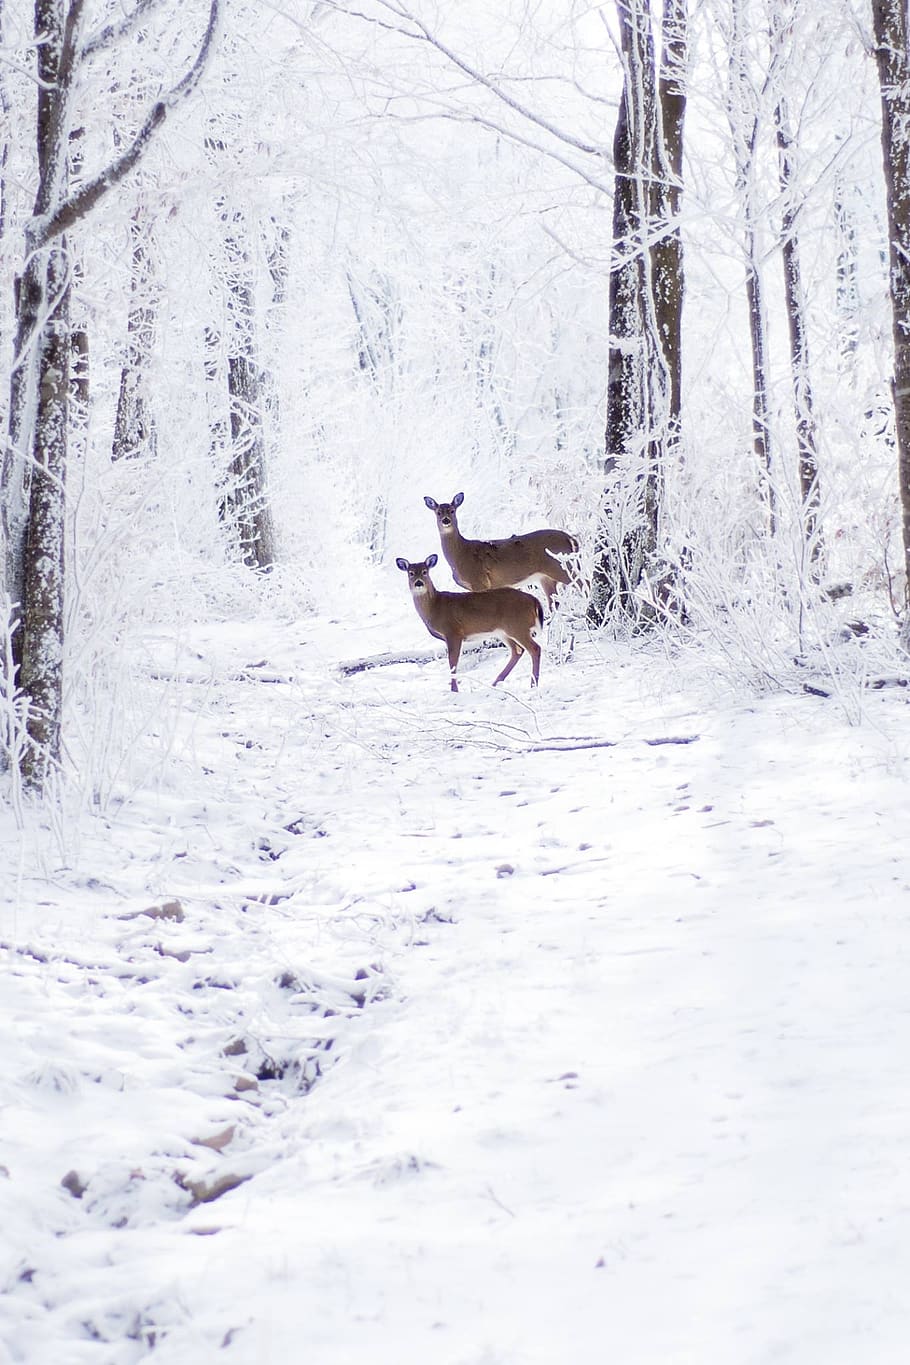 snow, winter, cold, frost, nature, deer, outdoors, season, wildlife, frosty